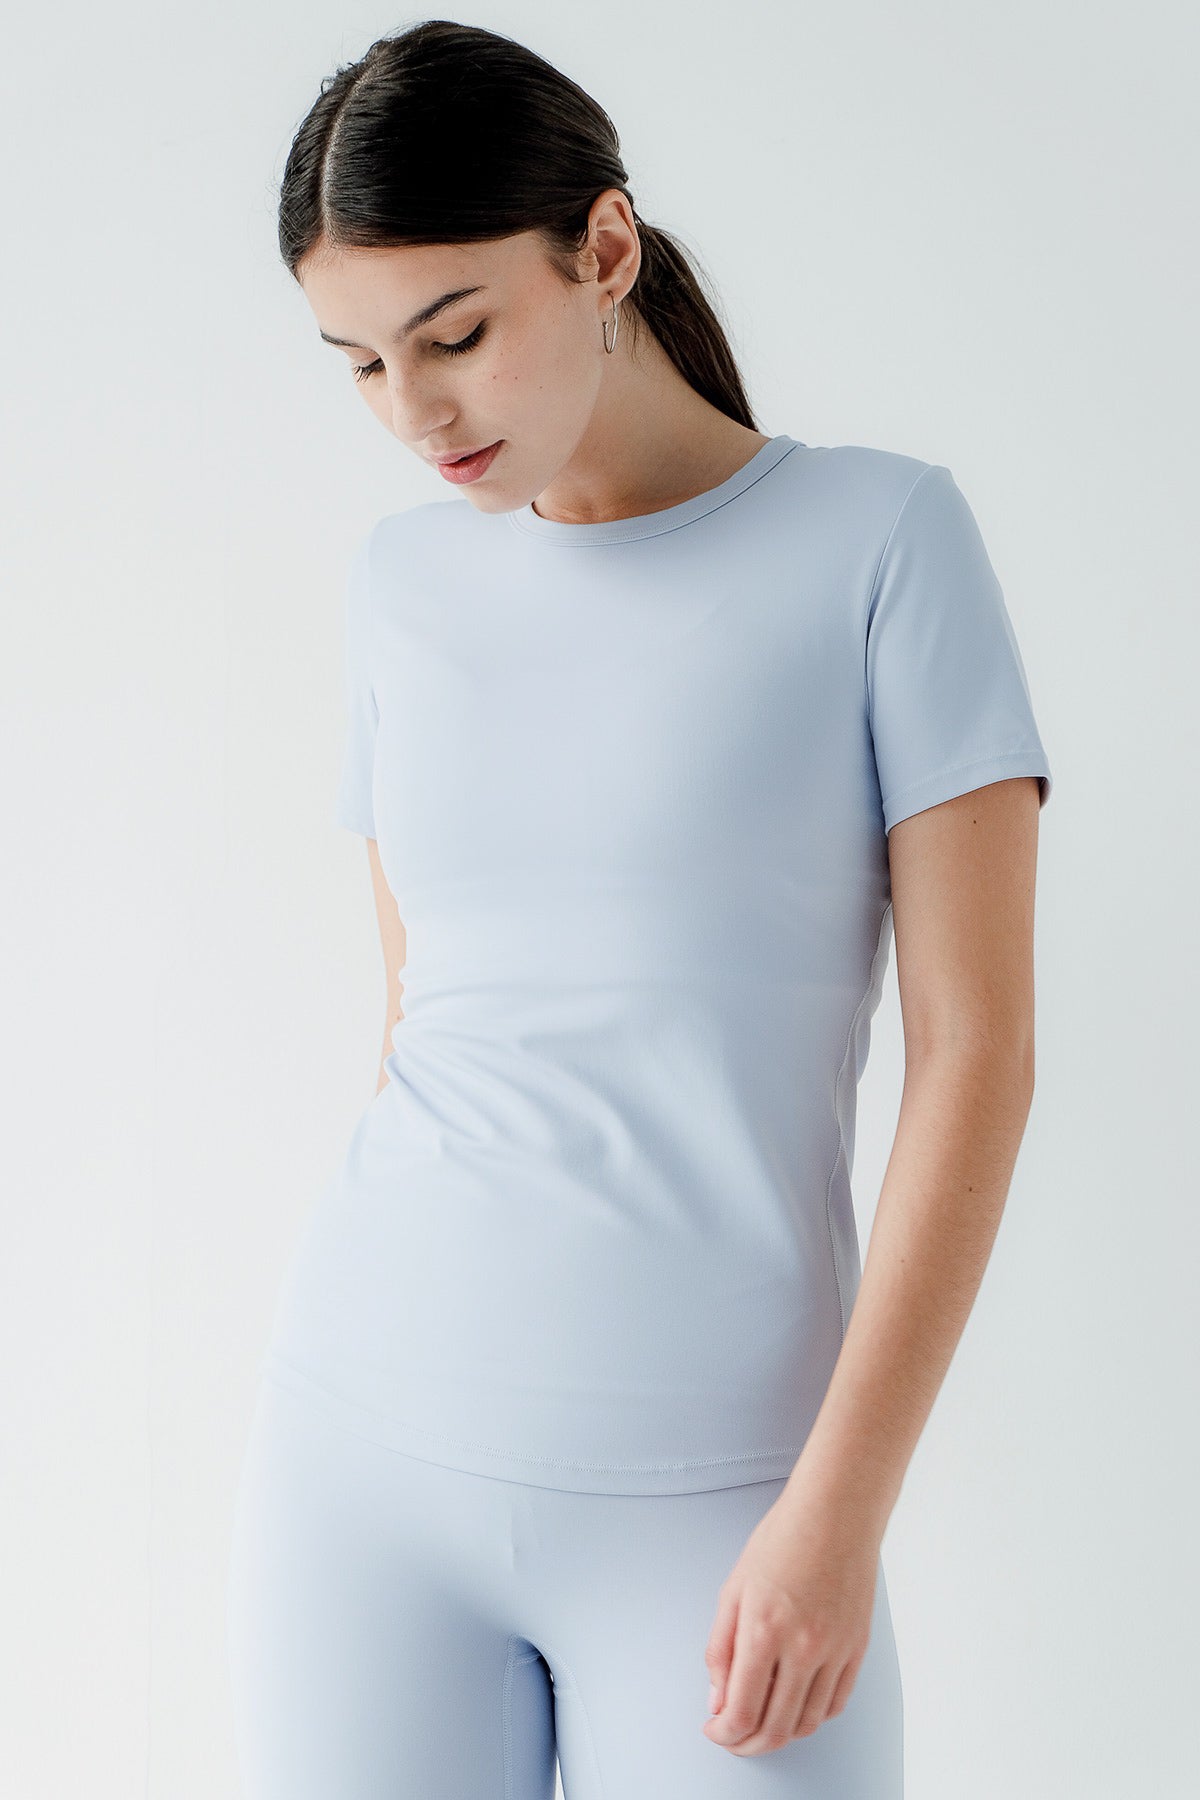 Staple T-shirt In Icy Blue (1 Left)